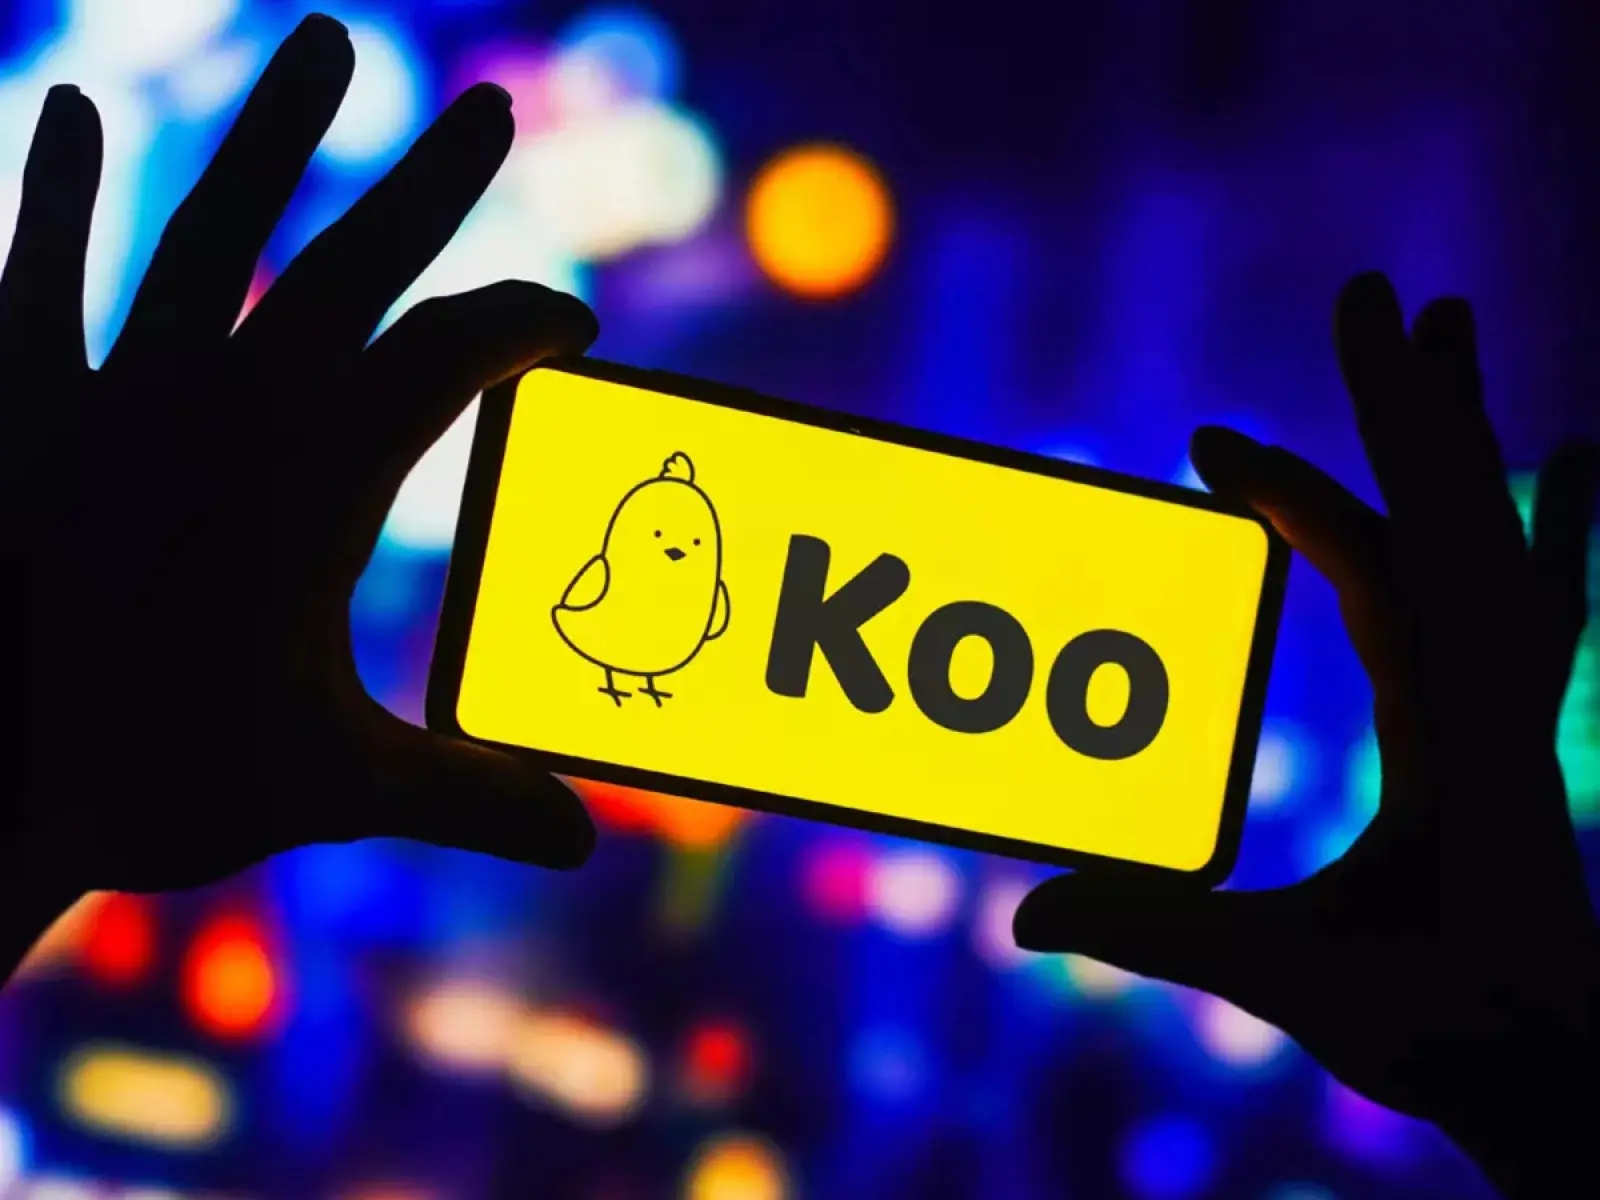 Indian micro-blogging platform Koo is going to be closed, decision taken after four years of struggle